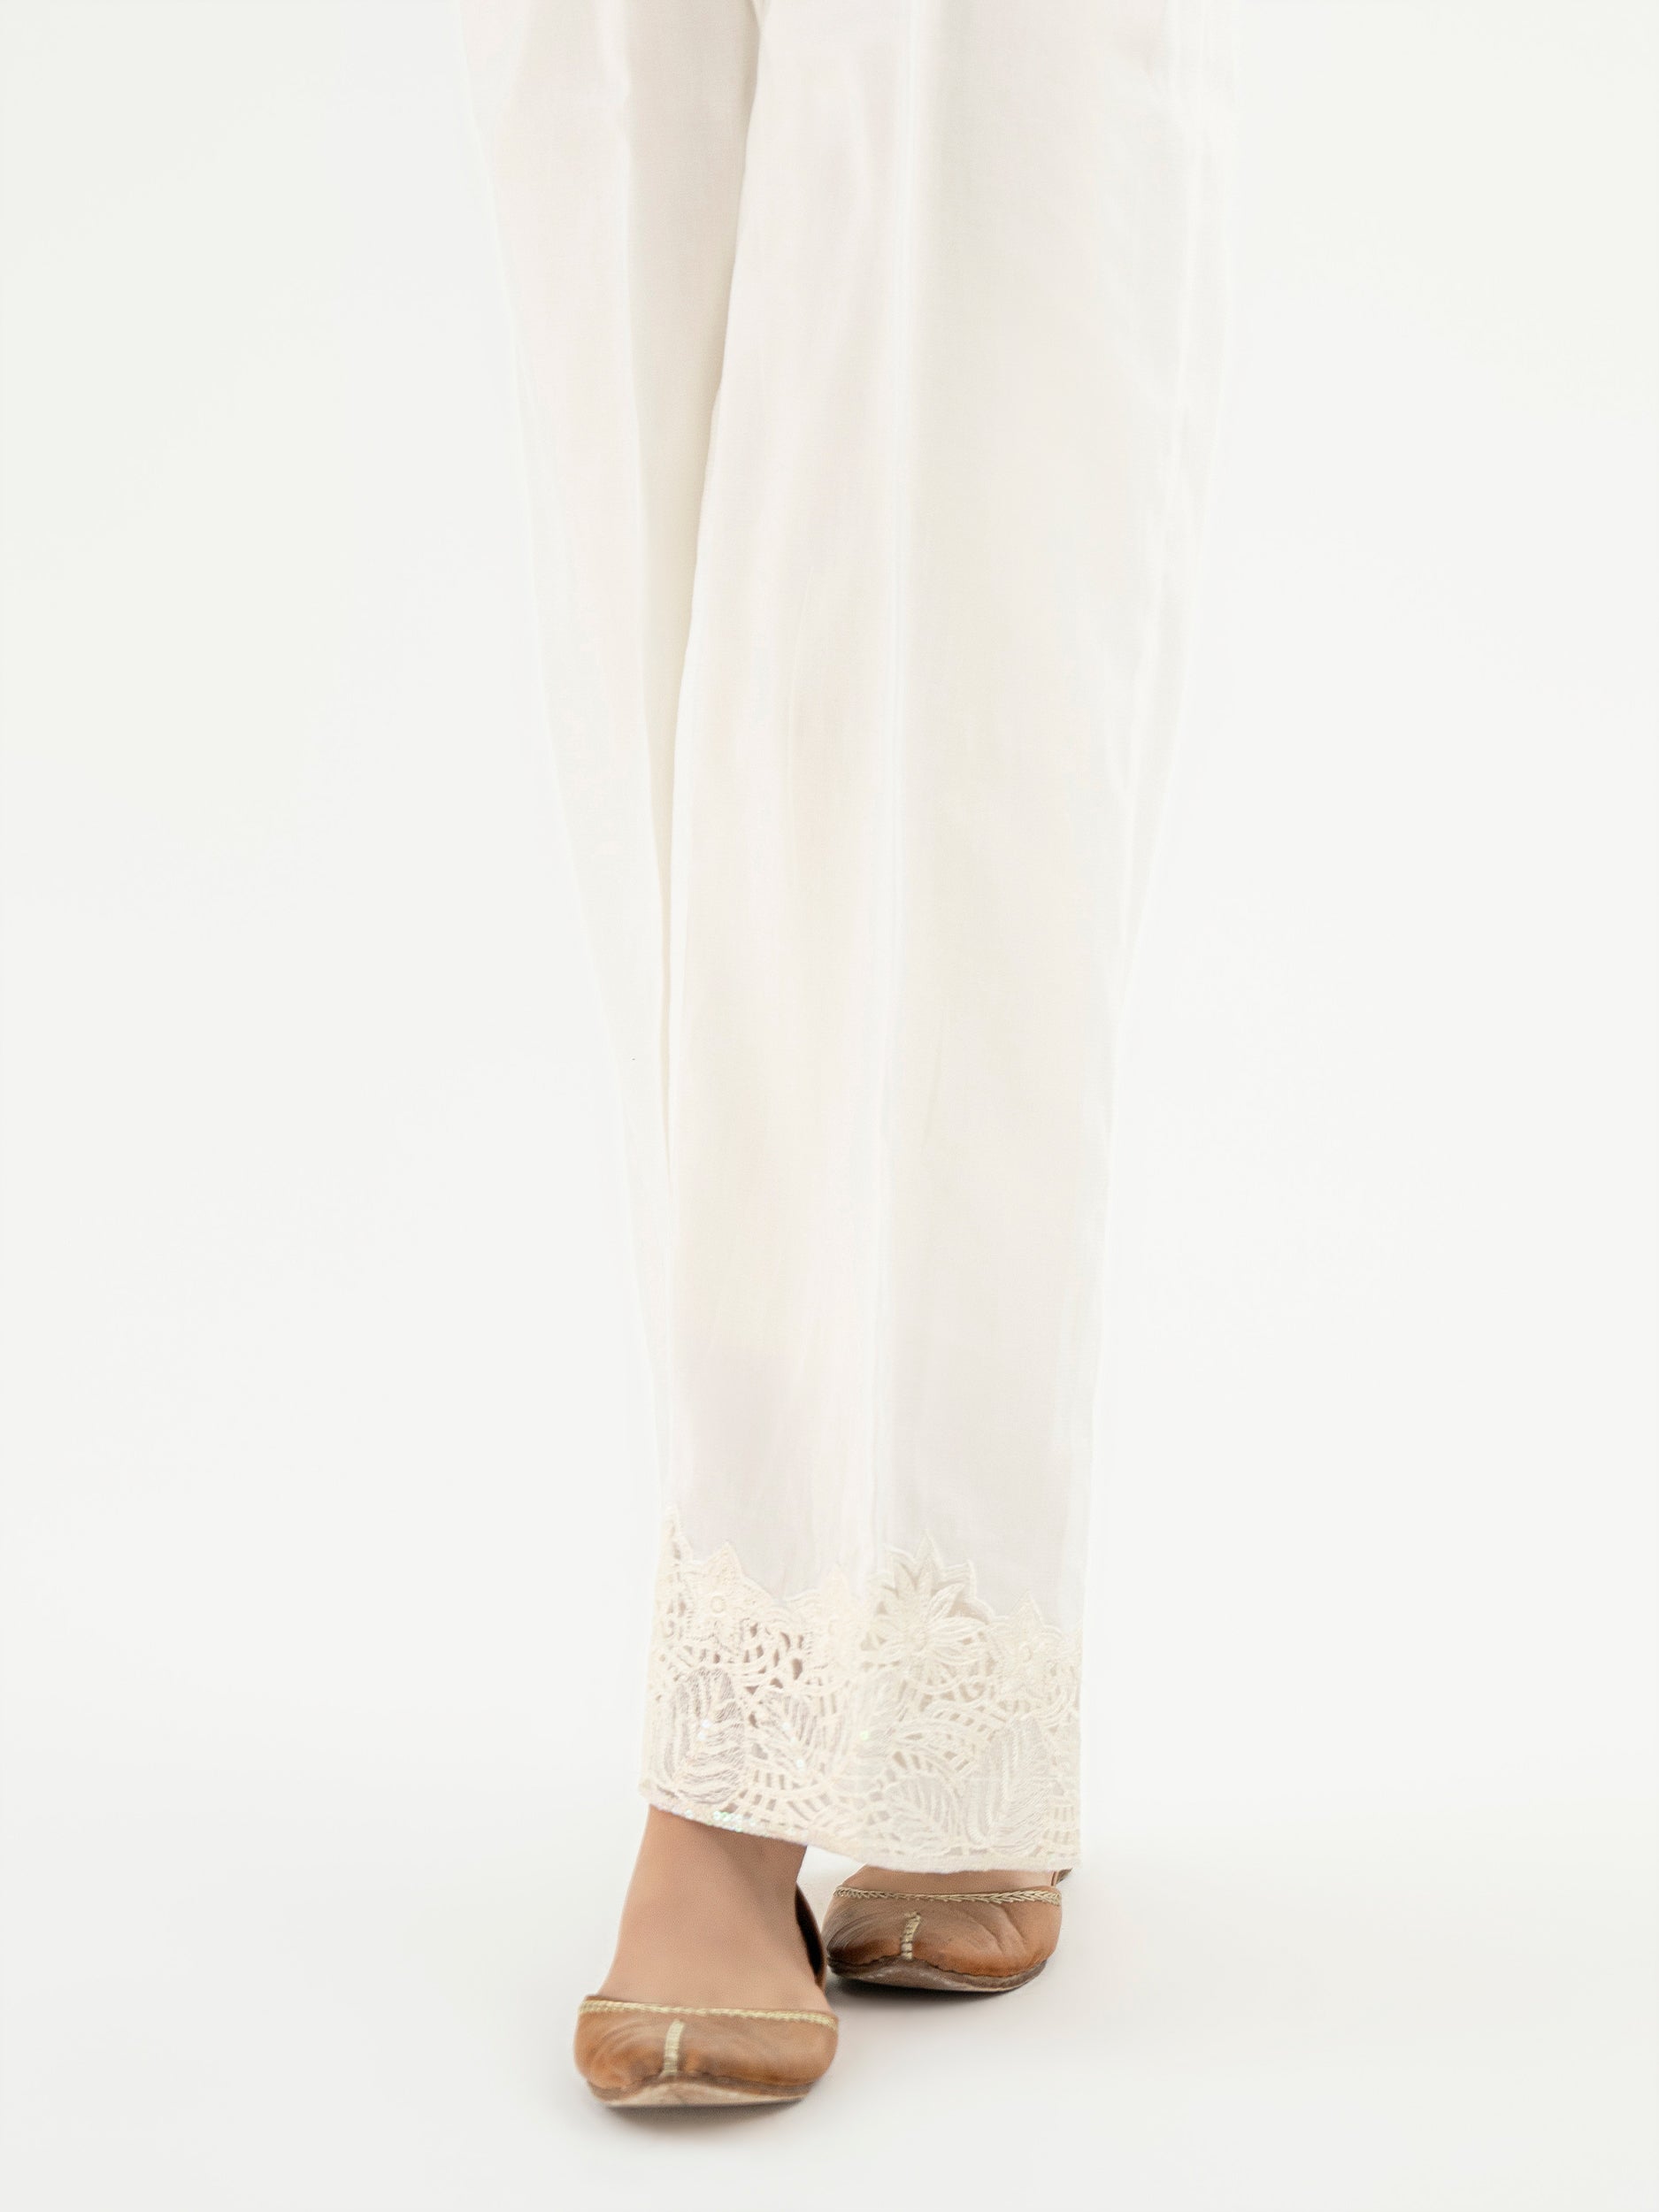 embroidered-satin-trouser-(pret)